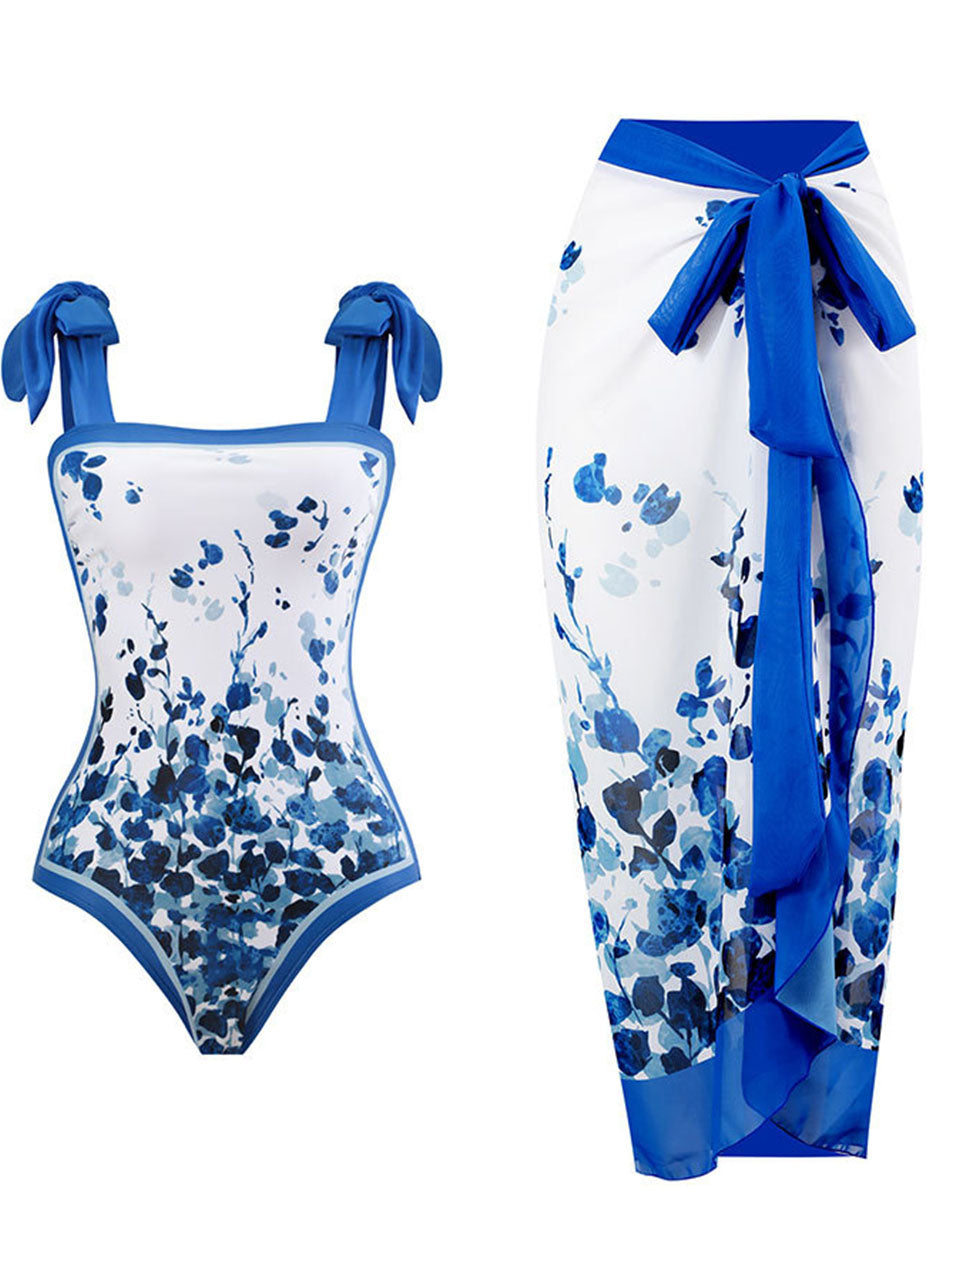 Blue Floral Print Flower Strap One Piece With Bathing Suit Wrap Skirt